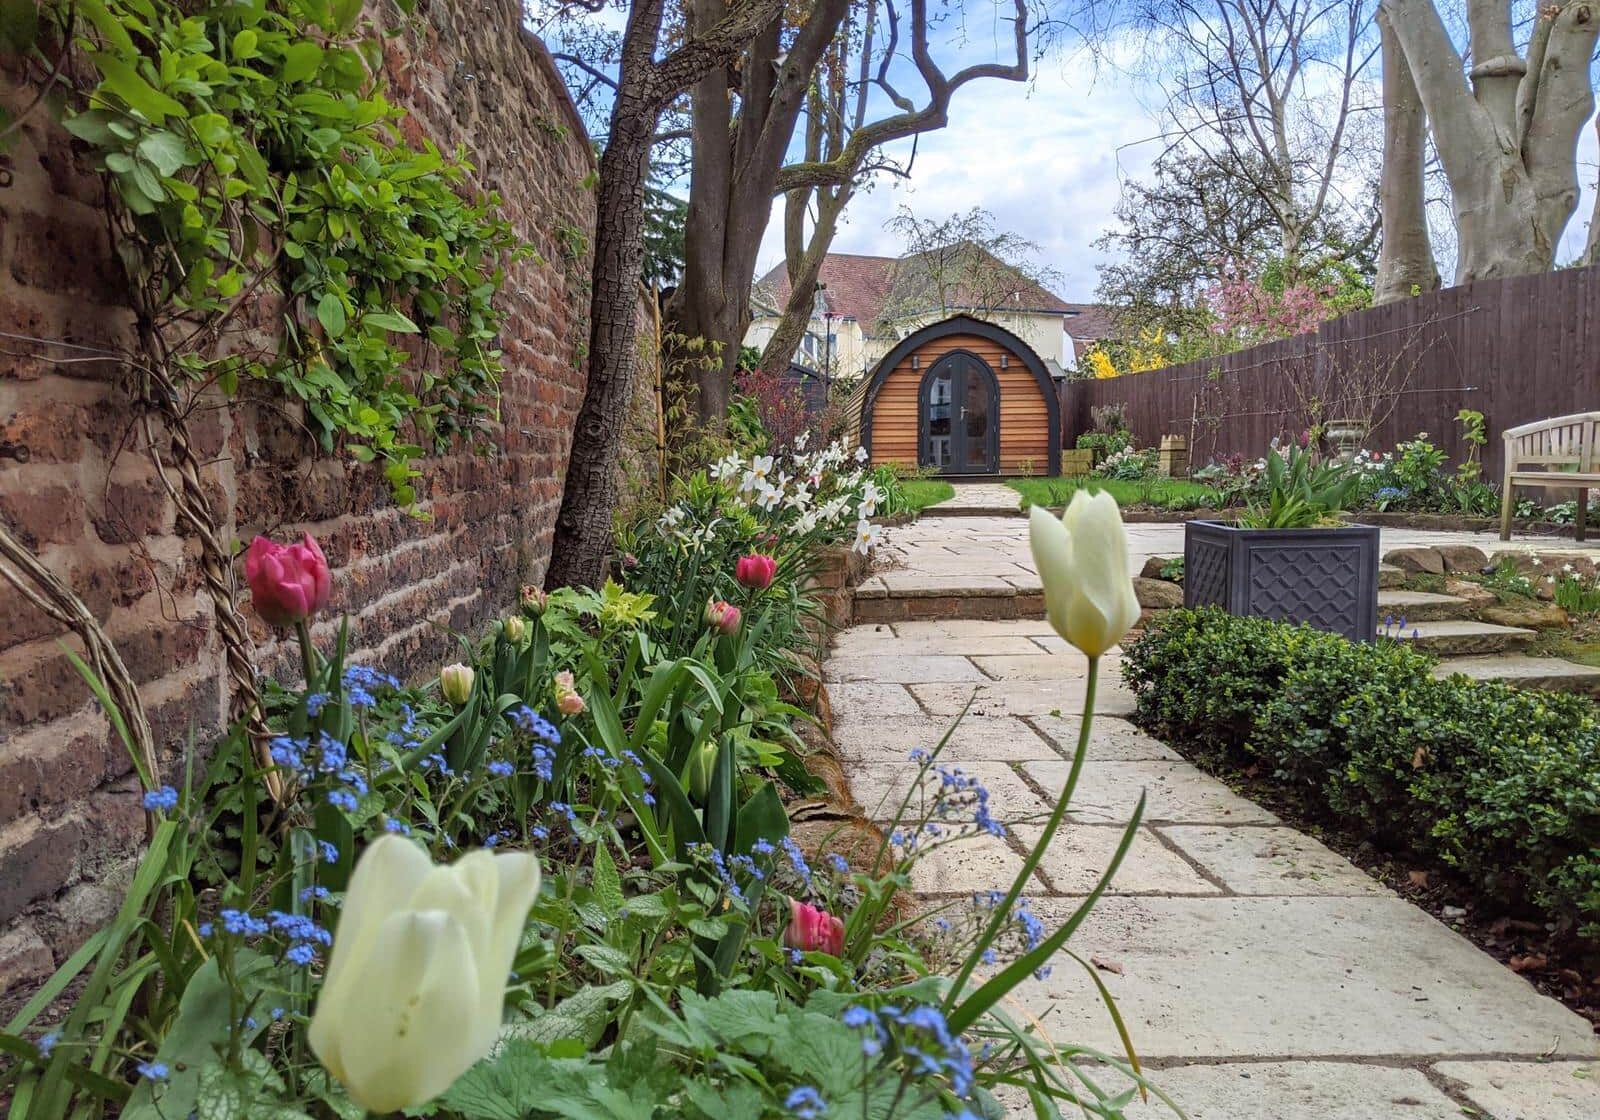 The Mews Cottage Garden in Chester